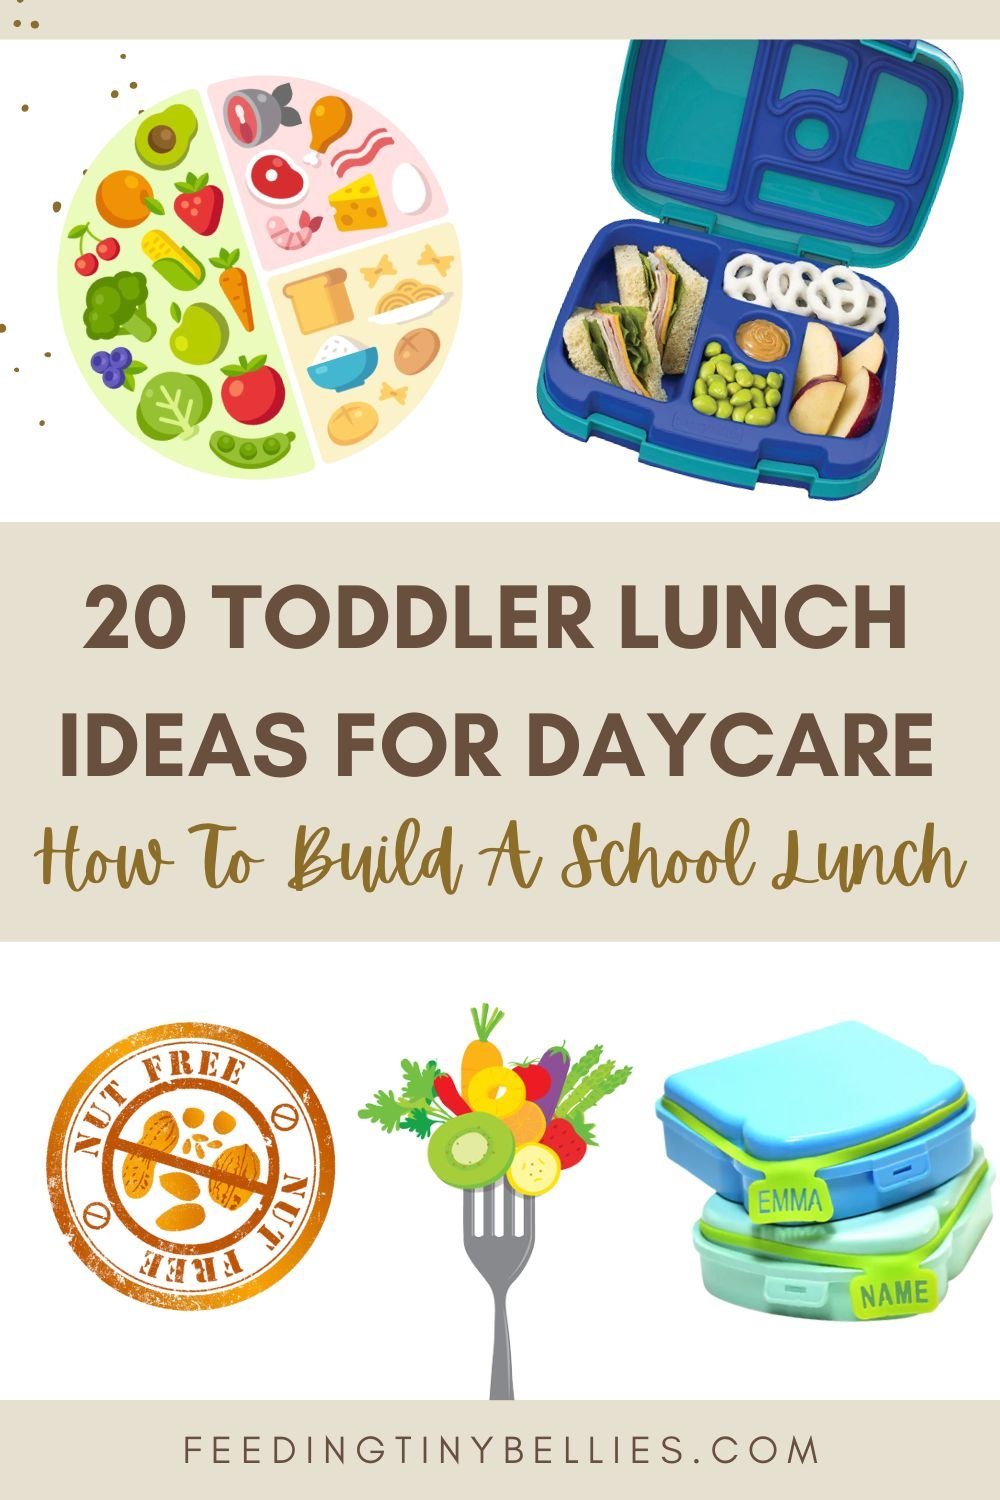 20+ easy and healthy daycare lunch ideas (for babies and toddlers) - My  Little Eater